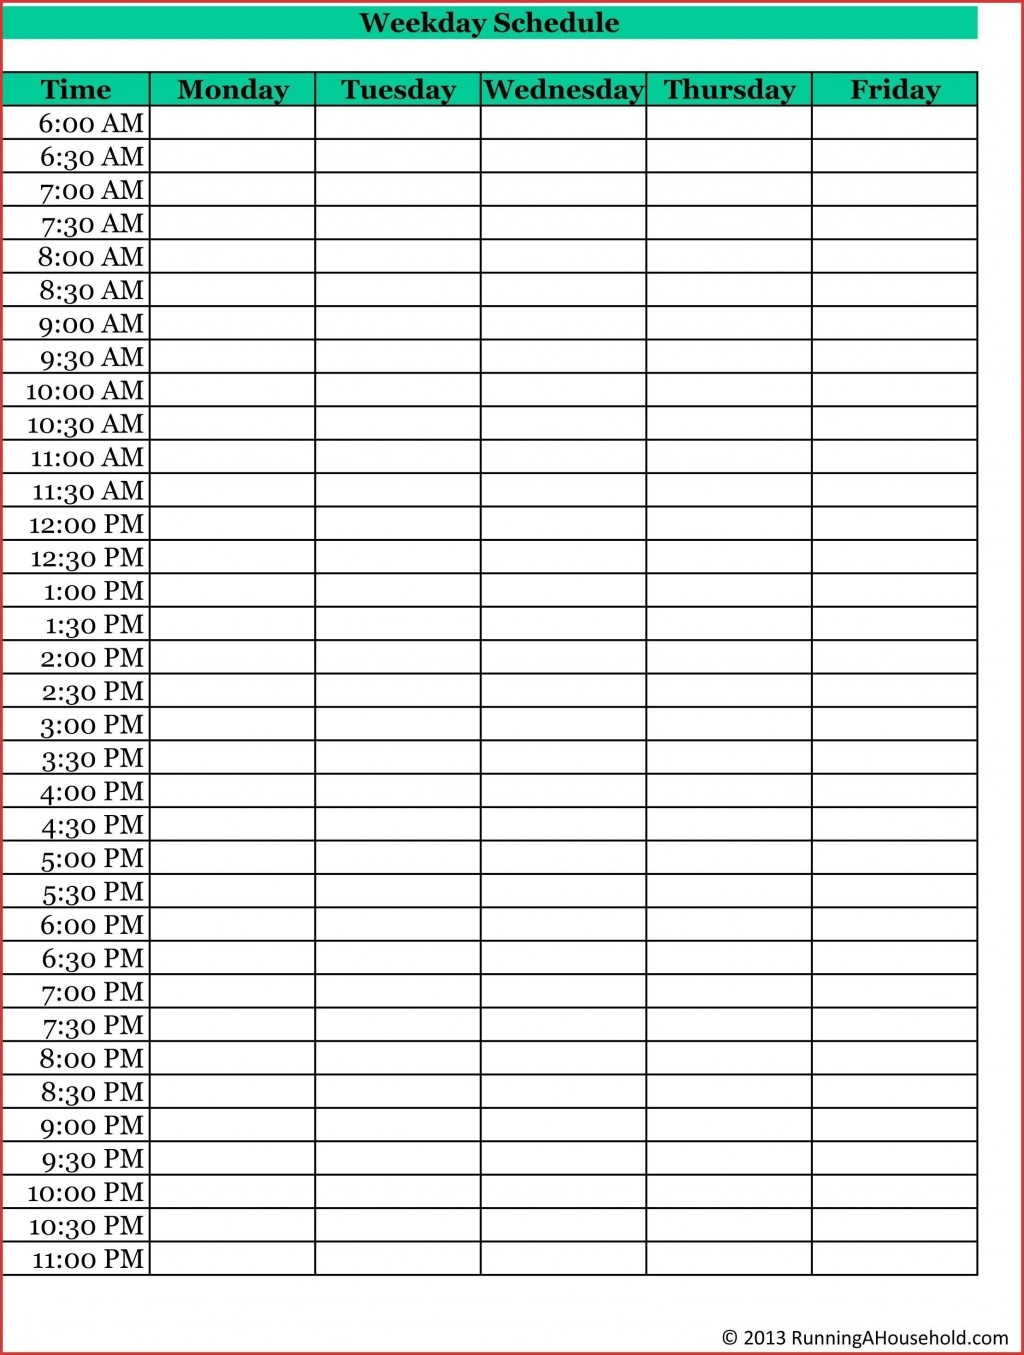 24 hour weekly schedule template excel addictionary